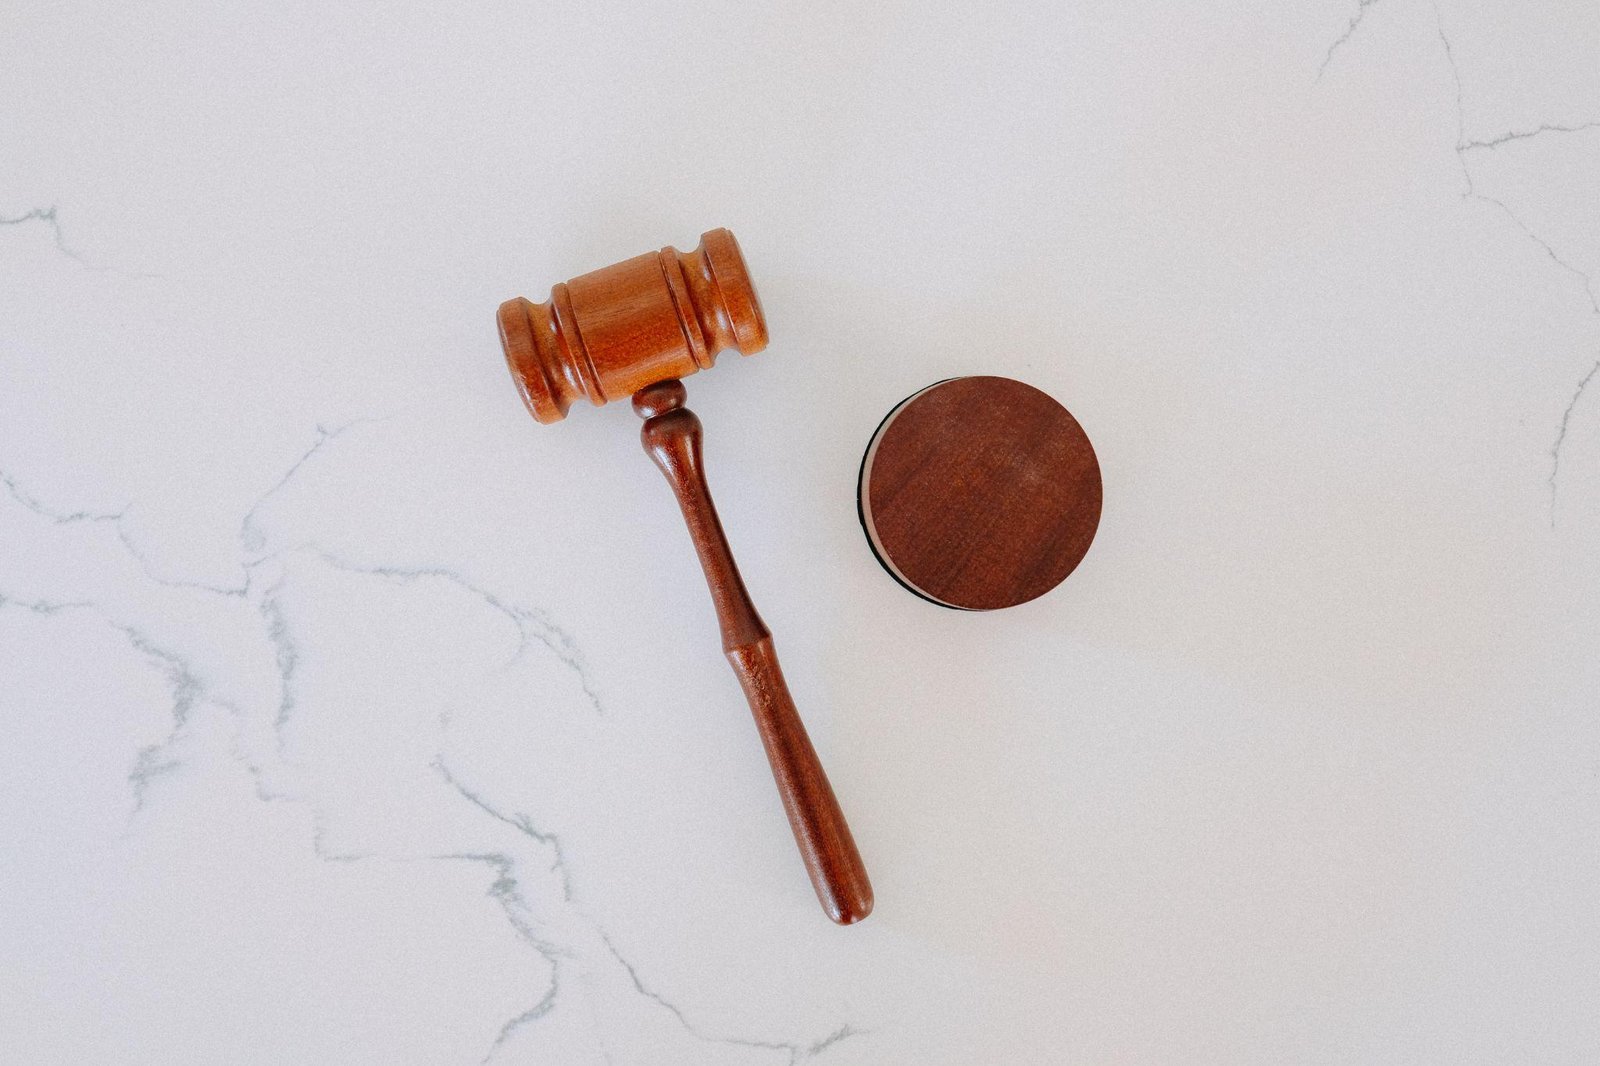 A wooden gavel and a round object

Description automatically generated